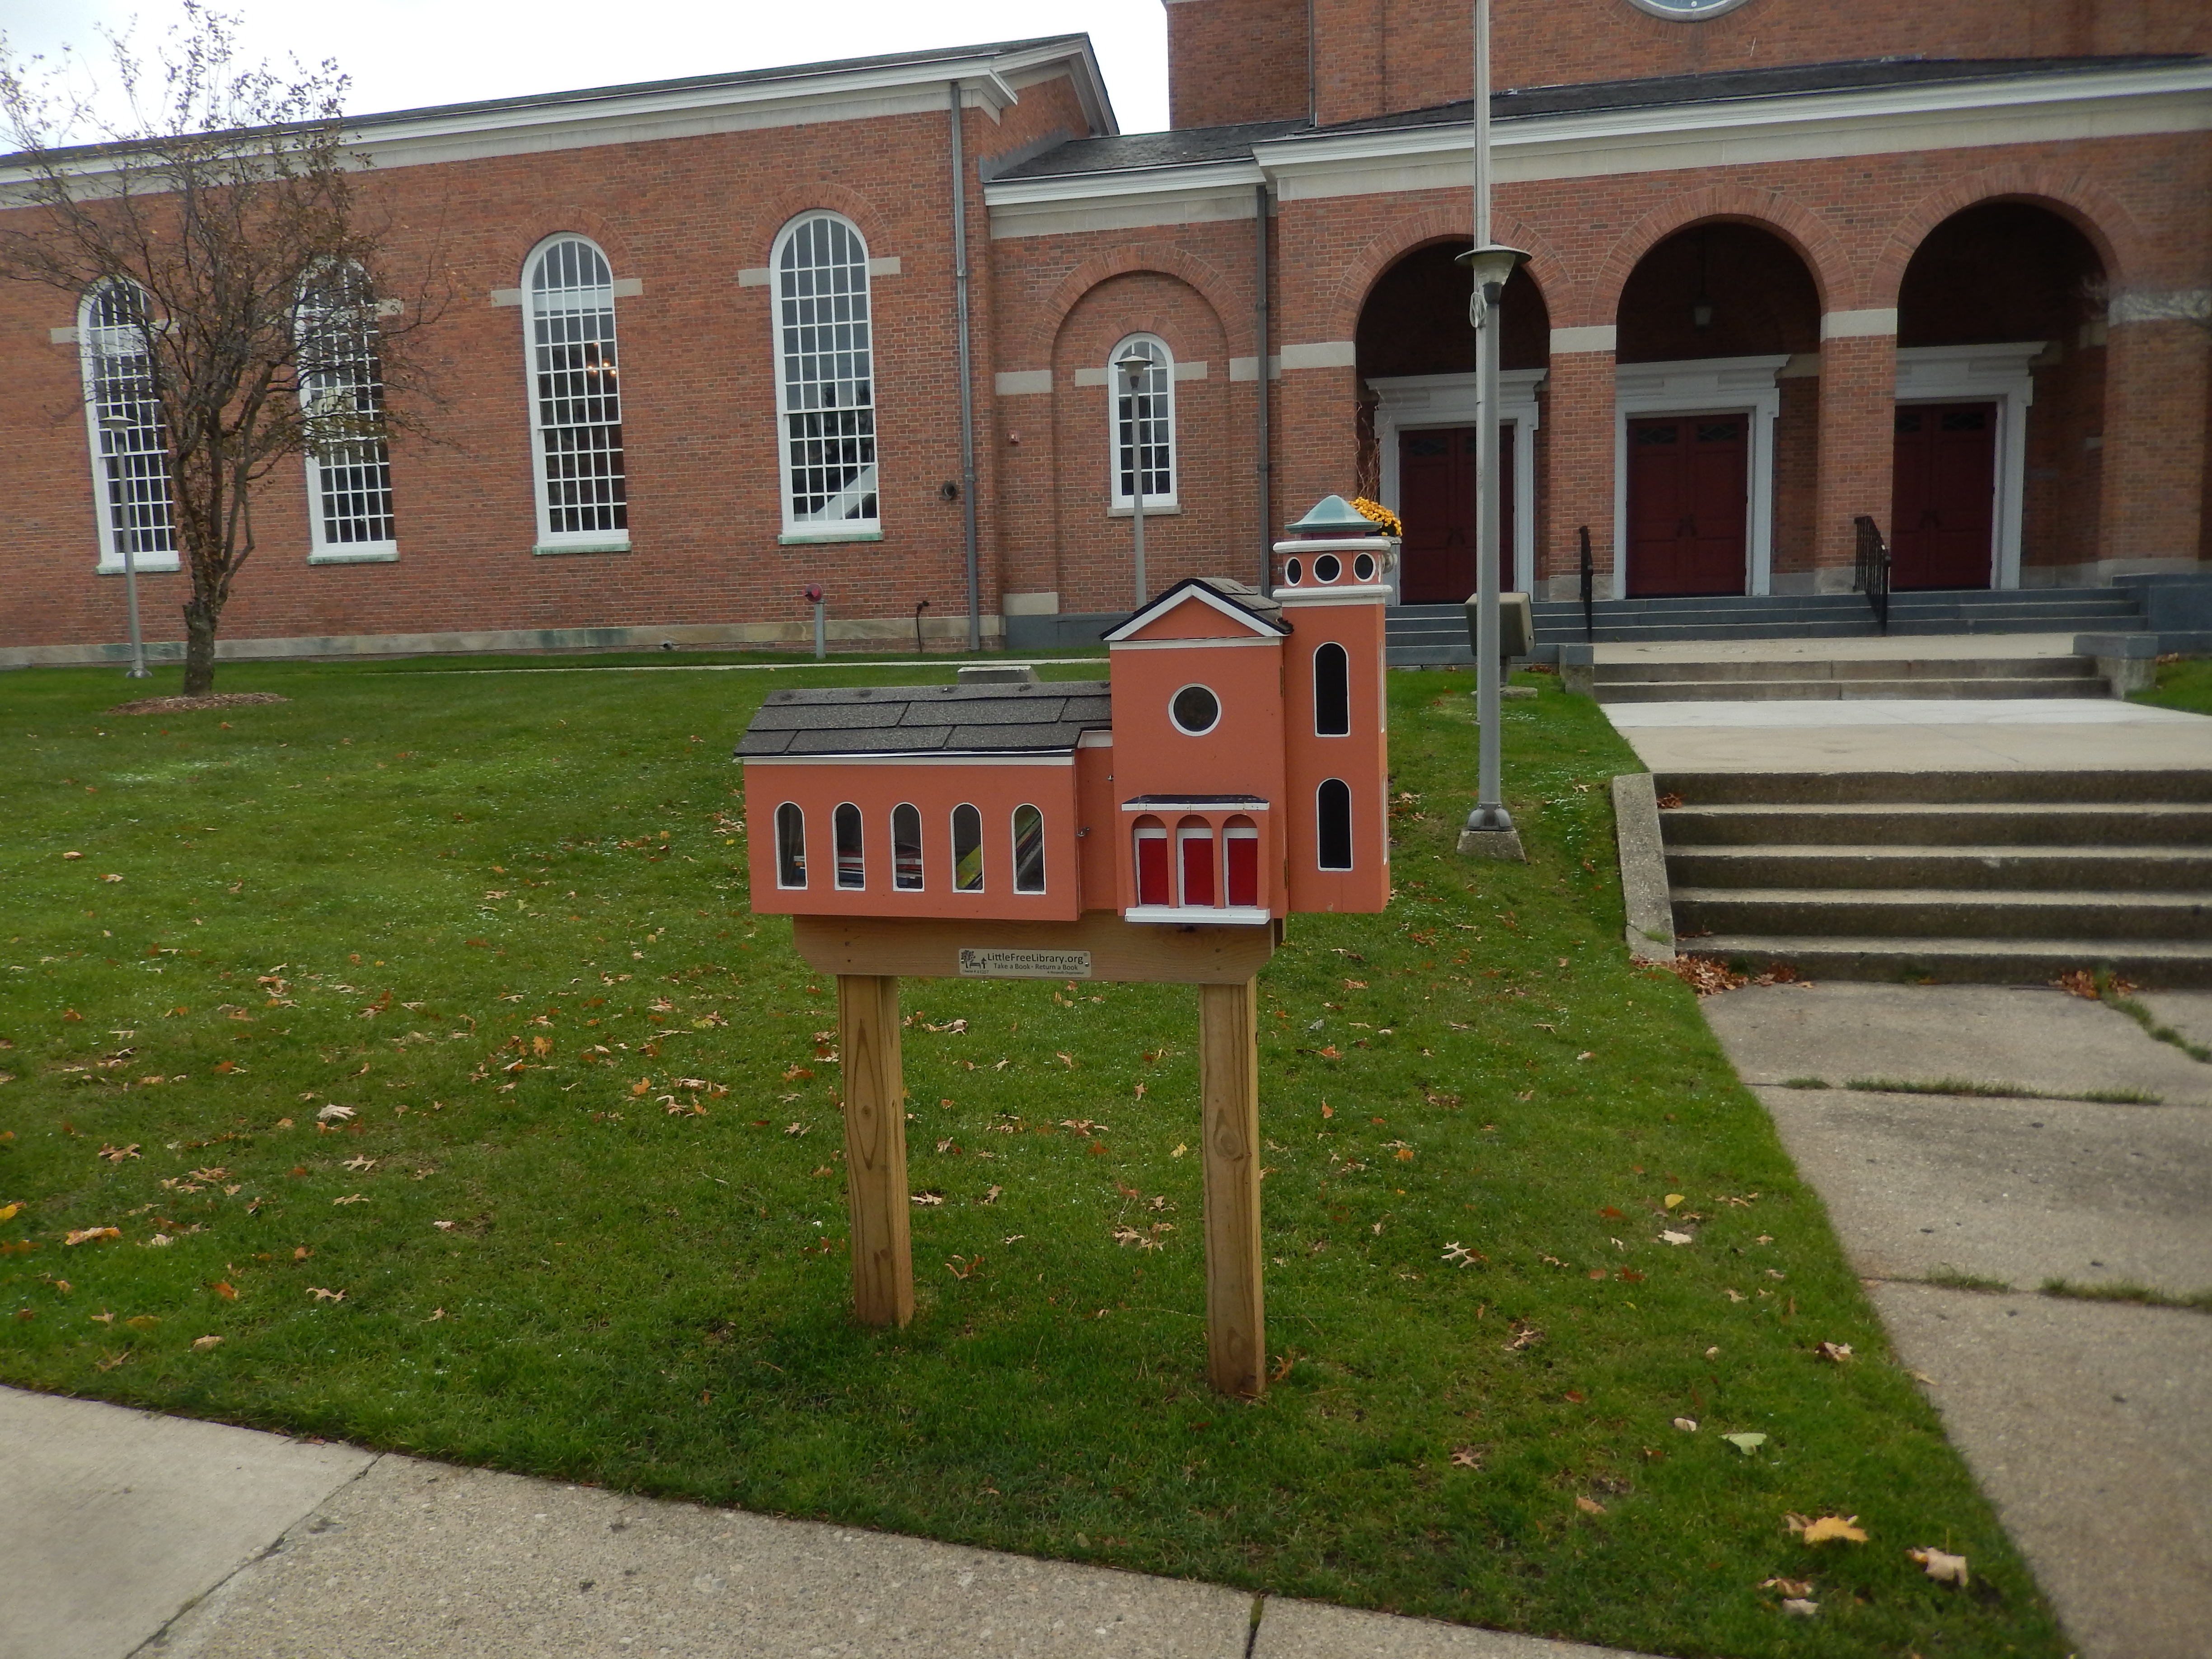 Book Return Box in front of the church